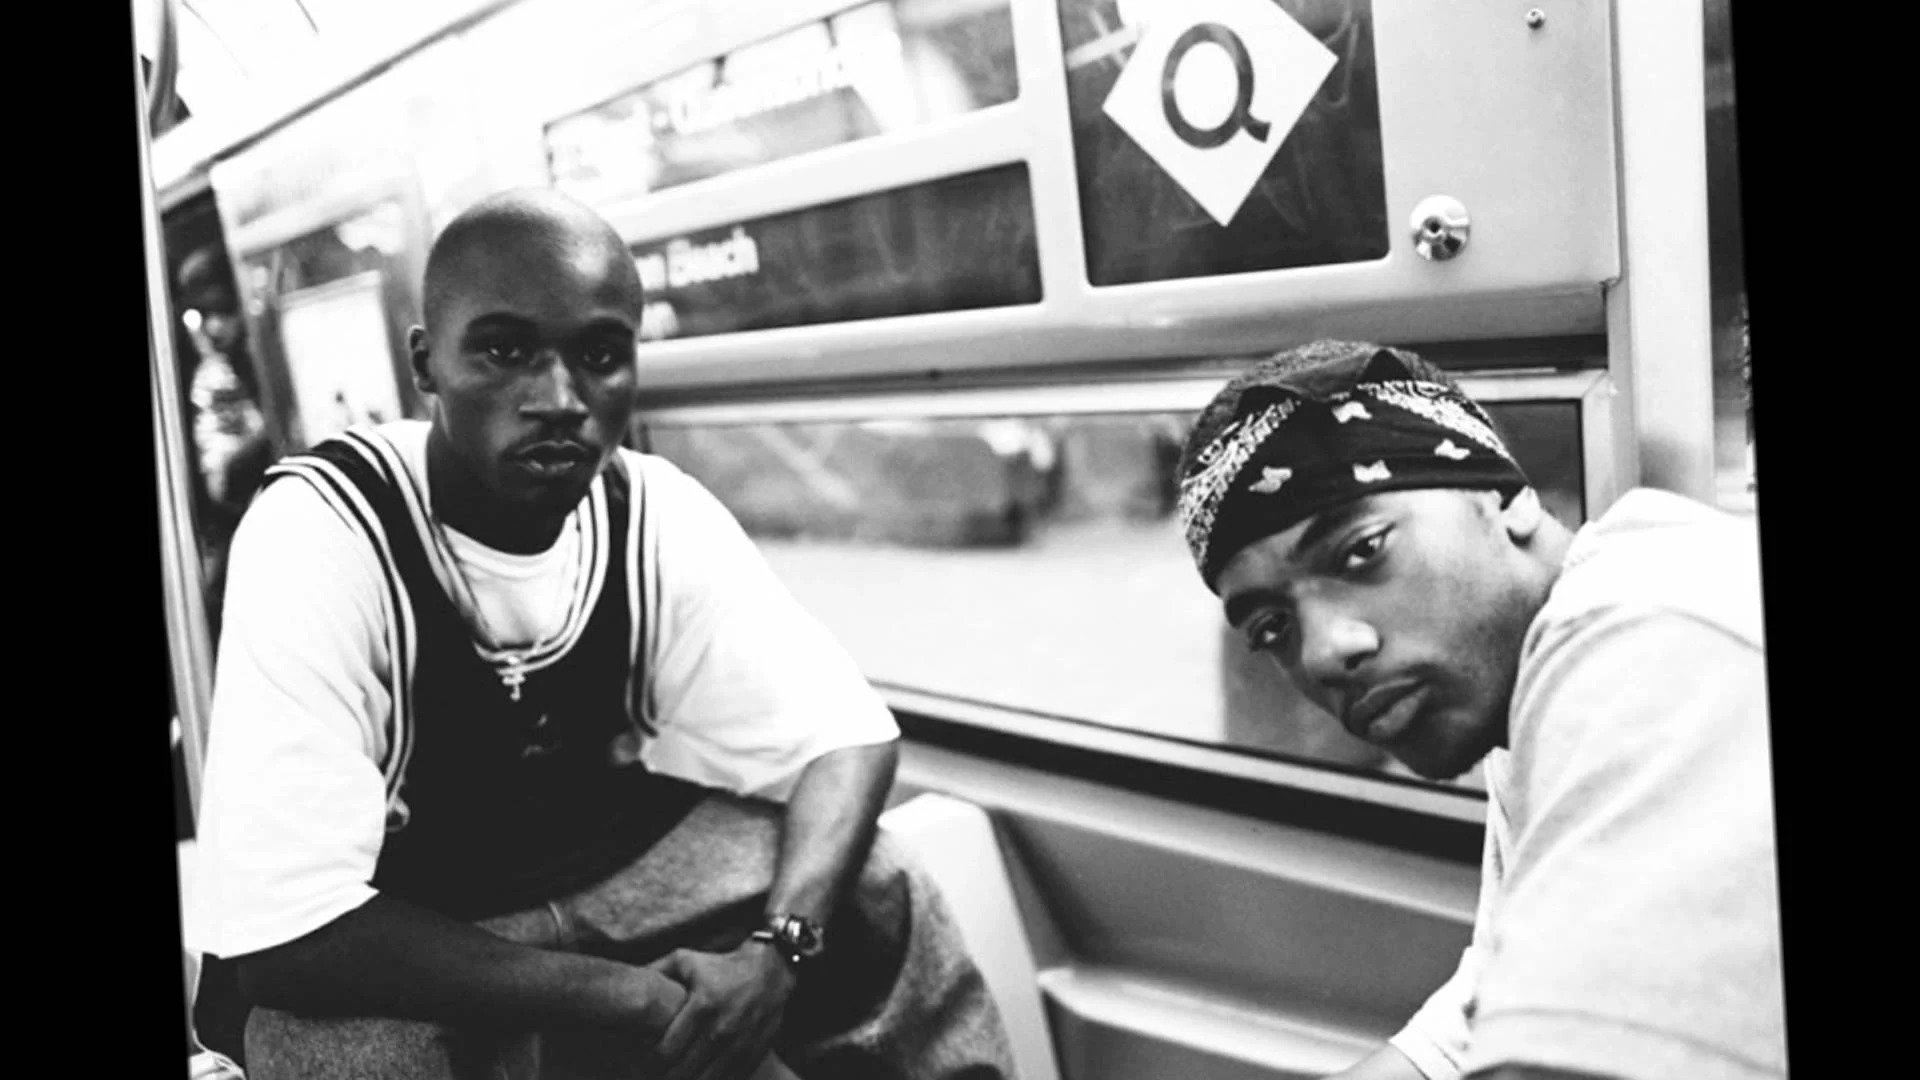 Mobb Deep. Havoc left and Prodigy right.